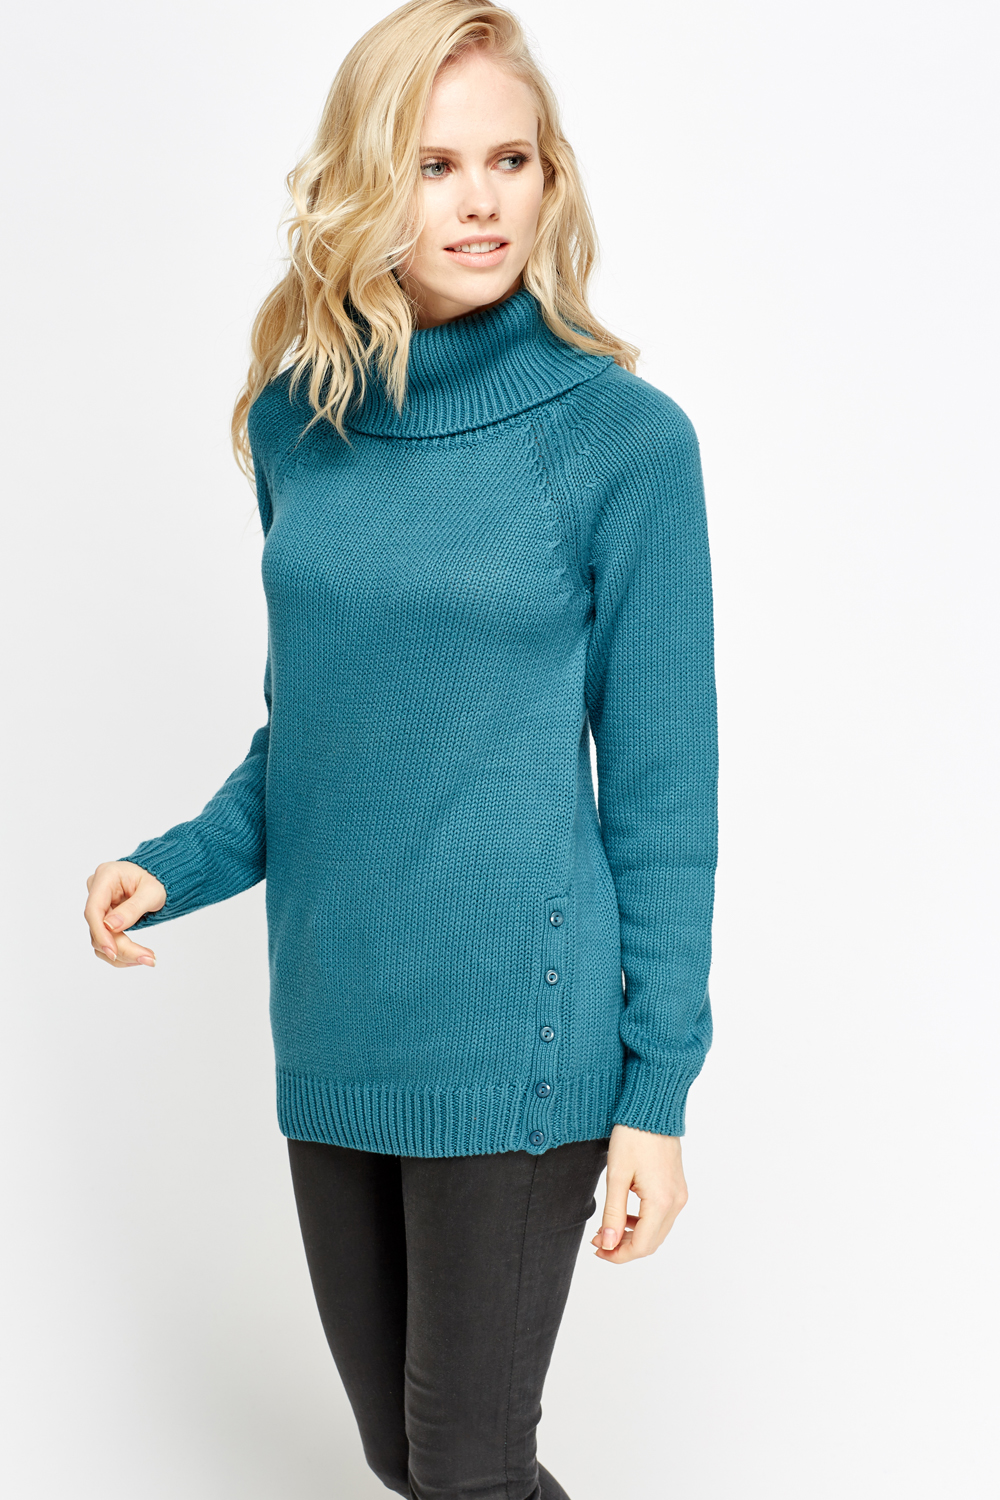 High Neck Knitted Jumper - Just $7